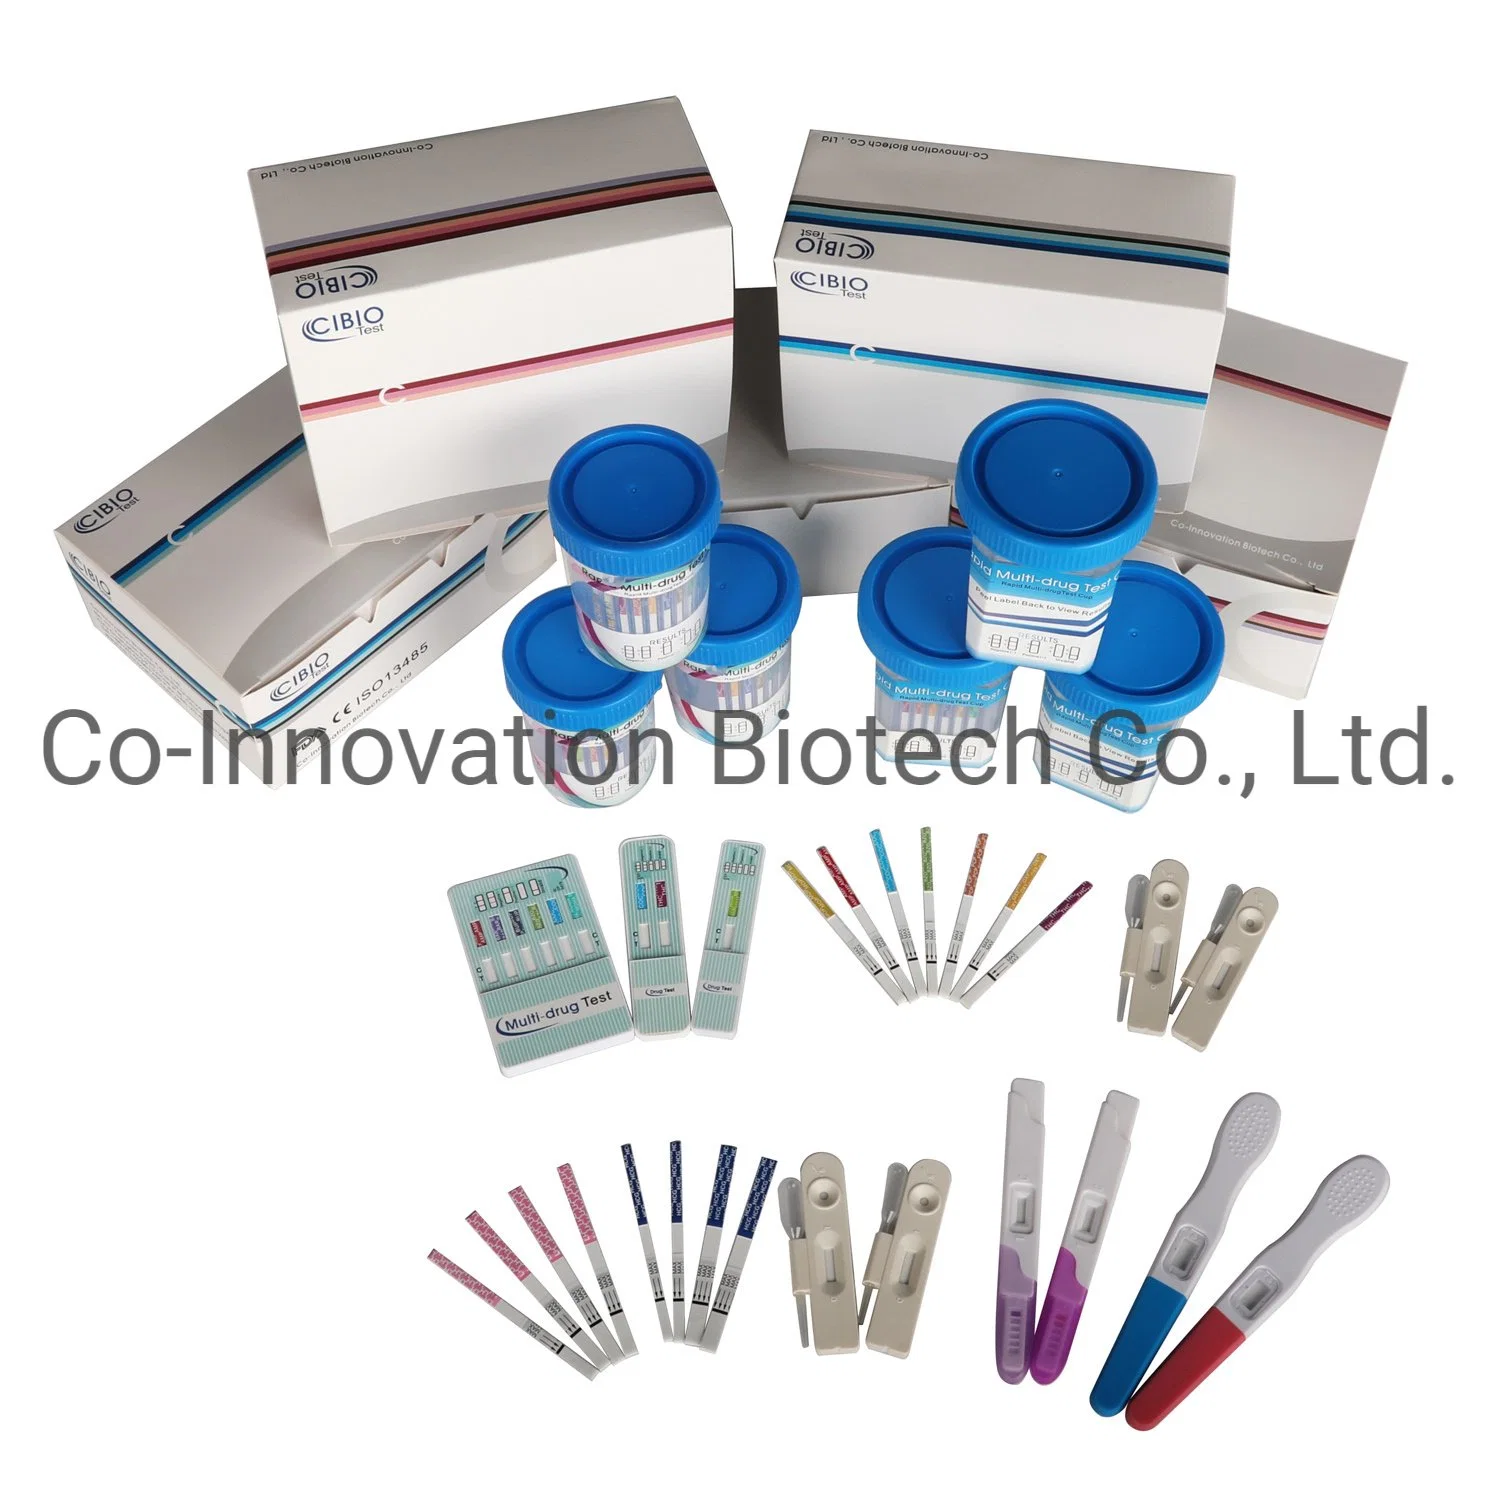 Chinese Manufacturer of Colloidal Gold in Vitro Diagnostic Products